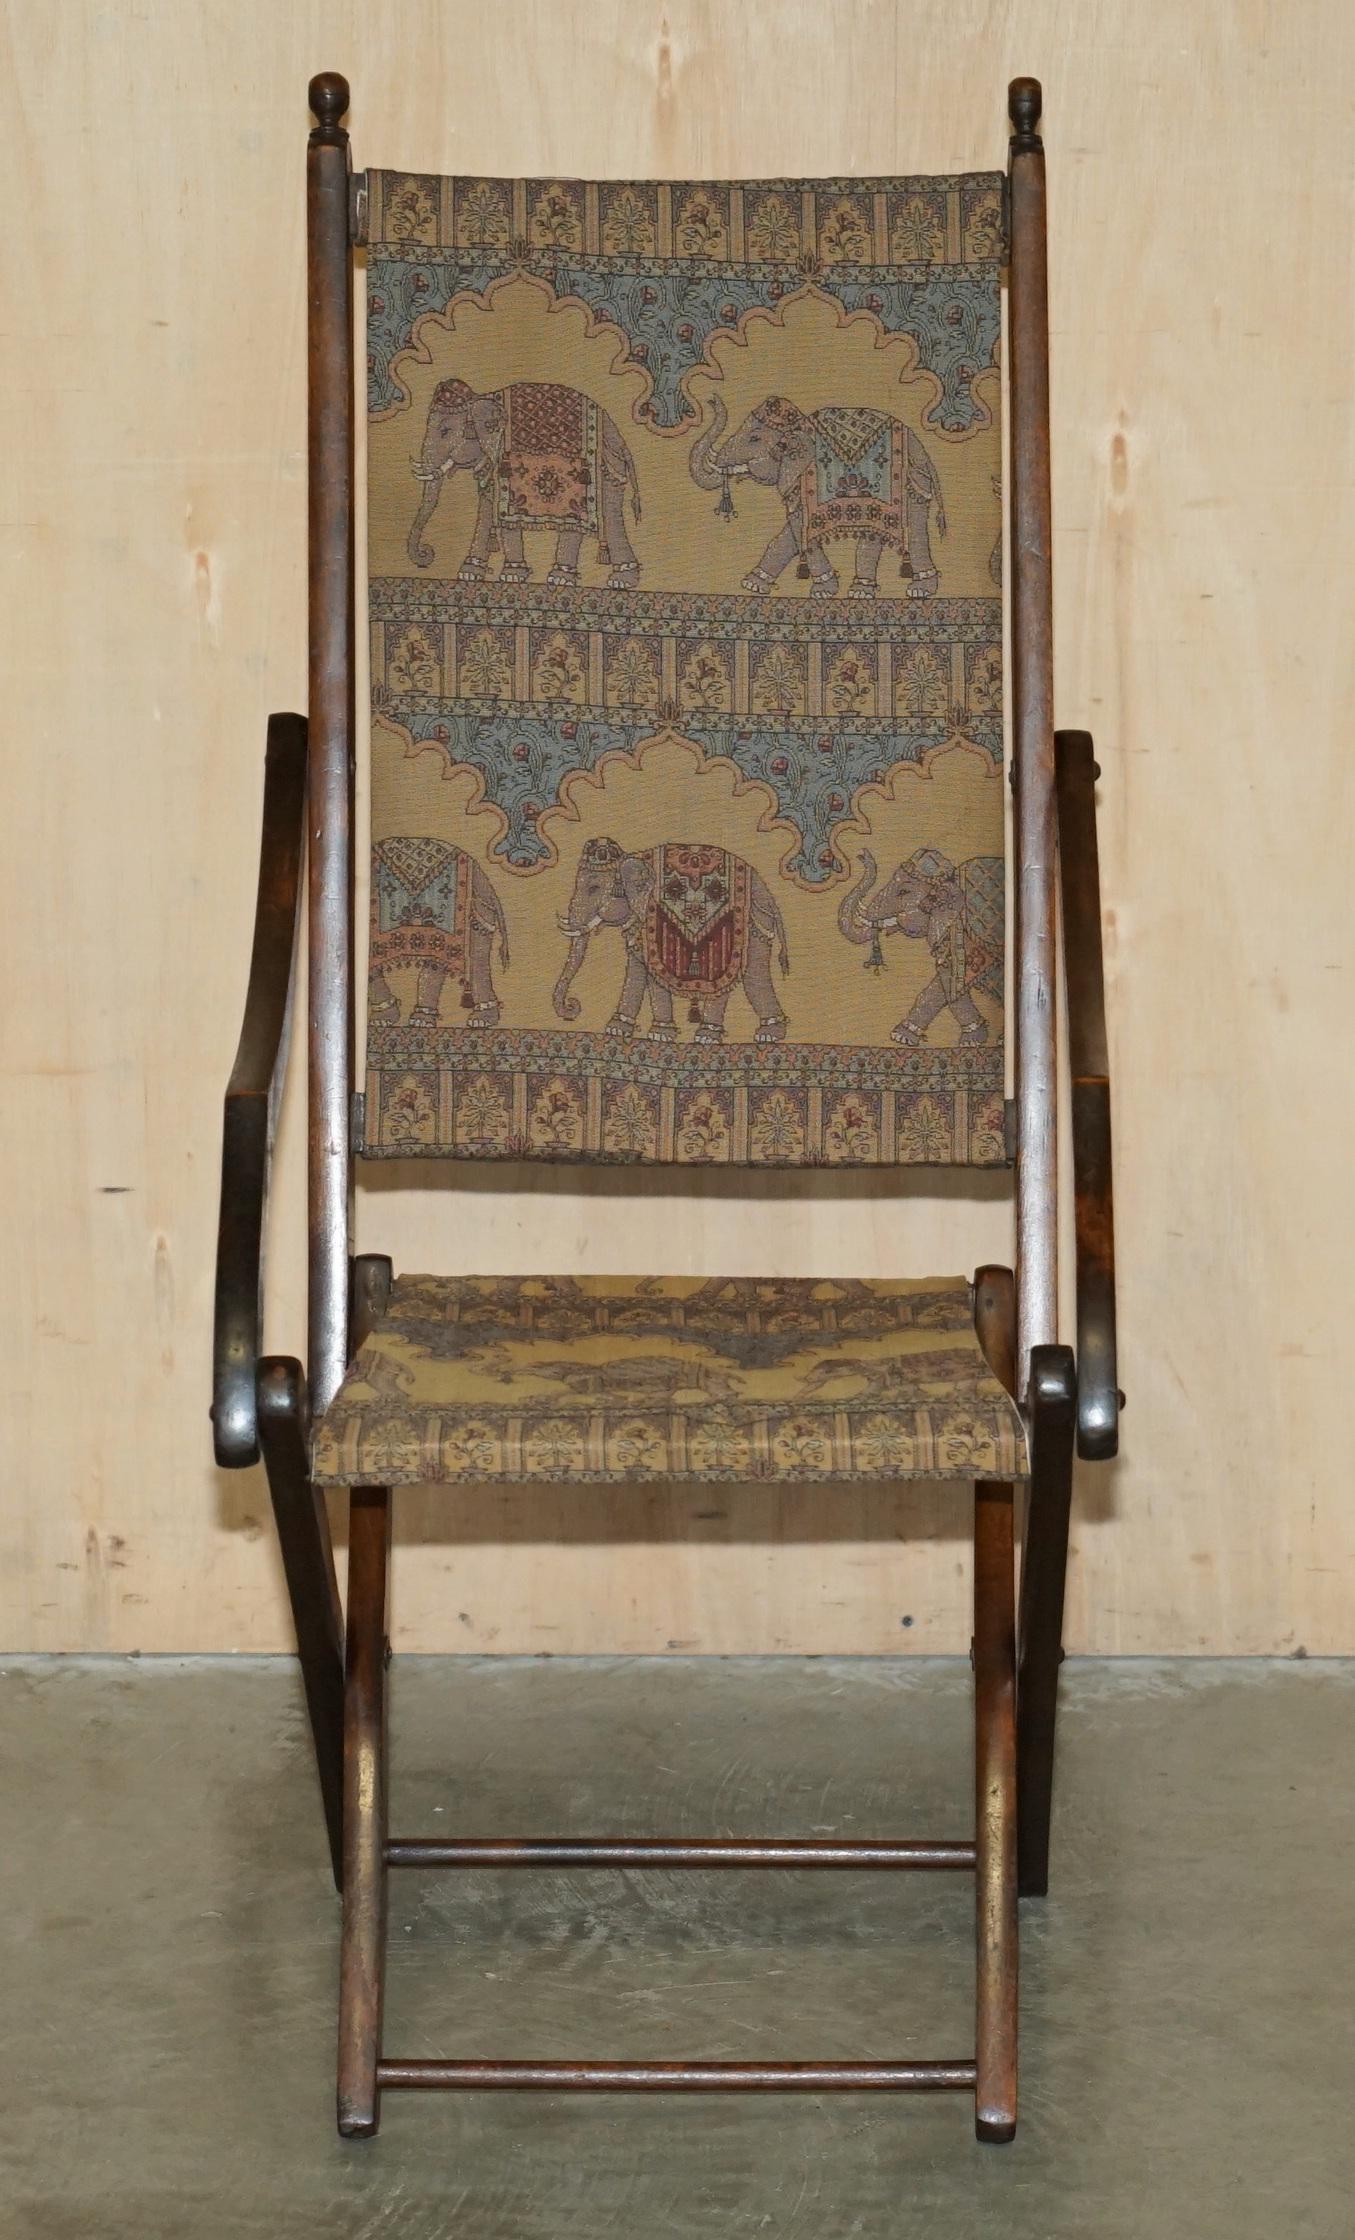 Royal House Antiques

Royal House Antiques is delighted to offer for sale this very rare circa 1890 Anglo Indian Elephant upholstered Colonial Military Campaign folding chair

Please note the delivery fee listed is just a guide, it covers within the